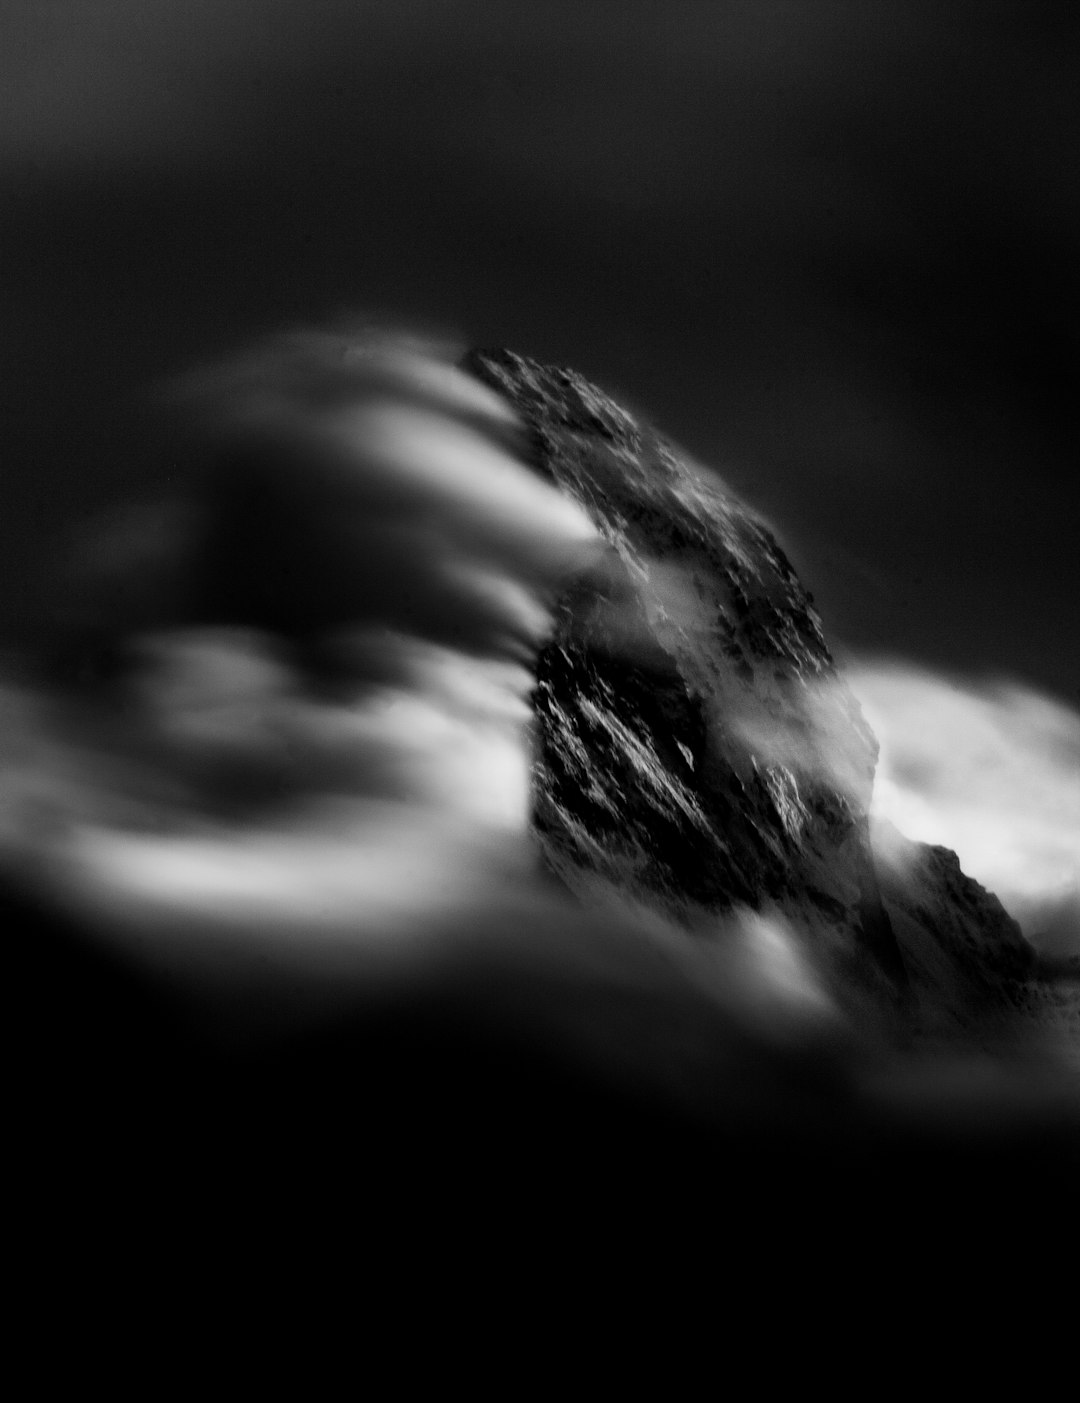 A black and white photograph of an isolated mountain peak, surrounded by swirling mist that creates the illusion of water flowing down its side. The mountain is in sharp focus against a blurred background of misty clouds. Shot with Nikon D850 for a dramatic contrast between light and dark areas. Soft lighting enhances the ethereal atmosphere. –ar 49:64